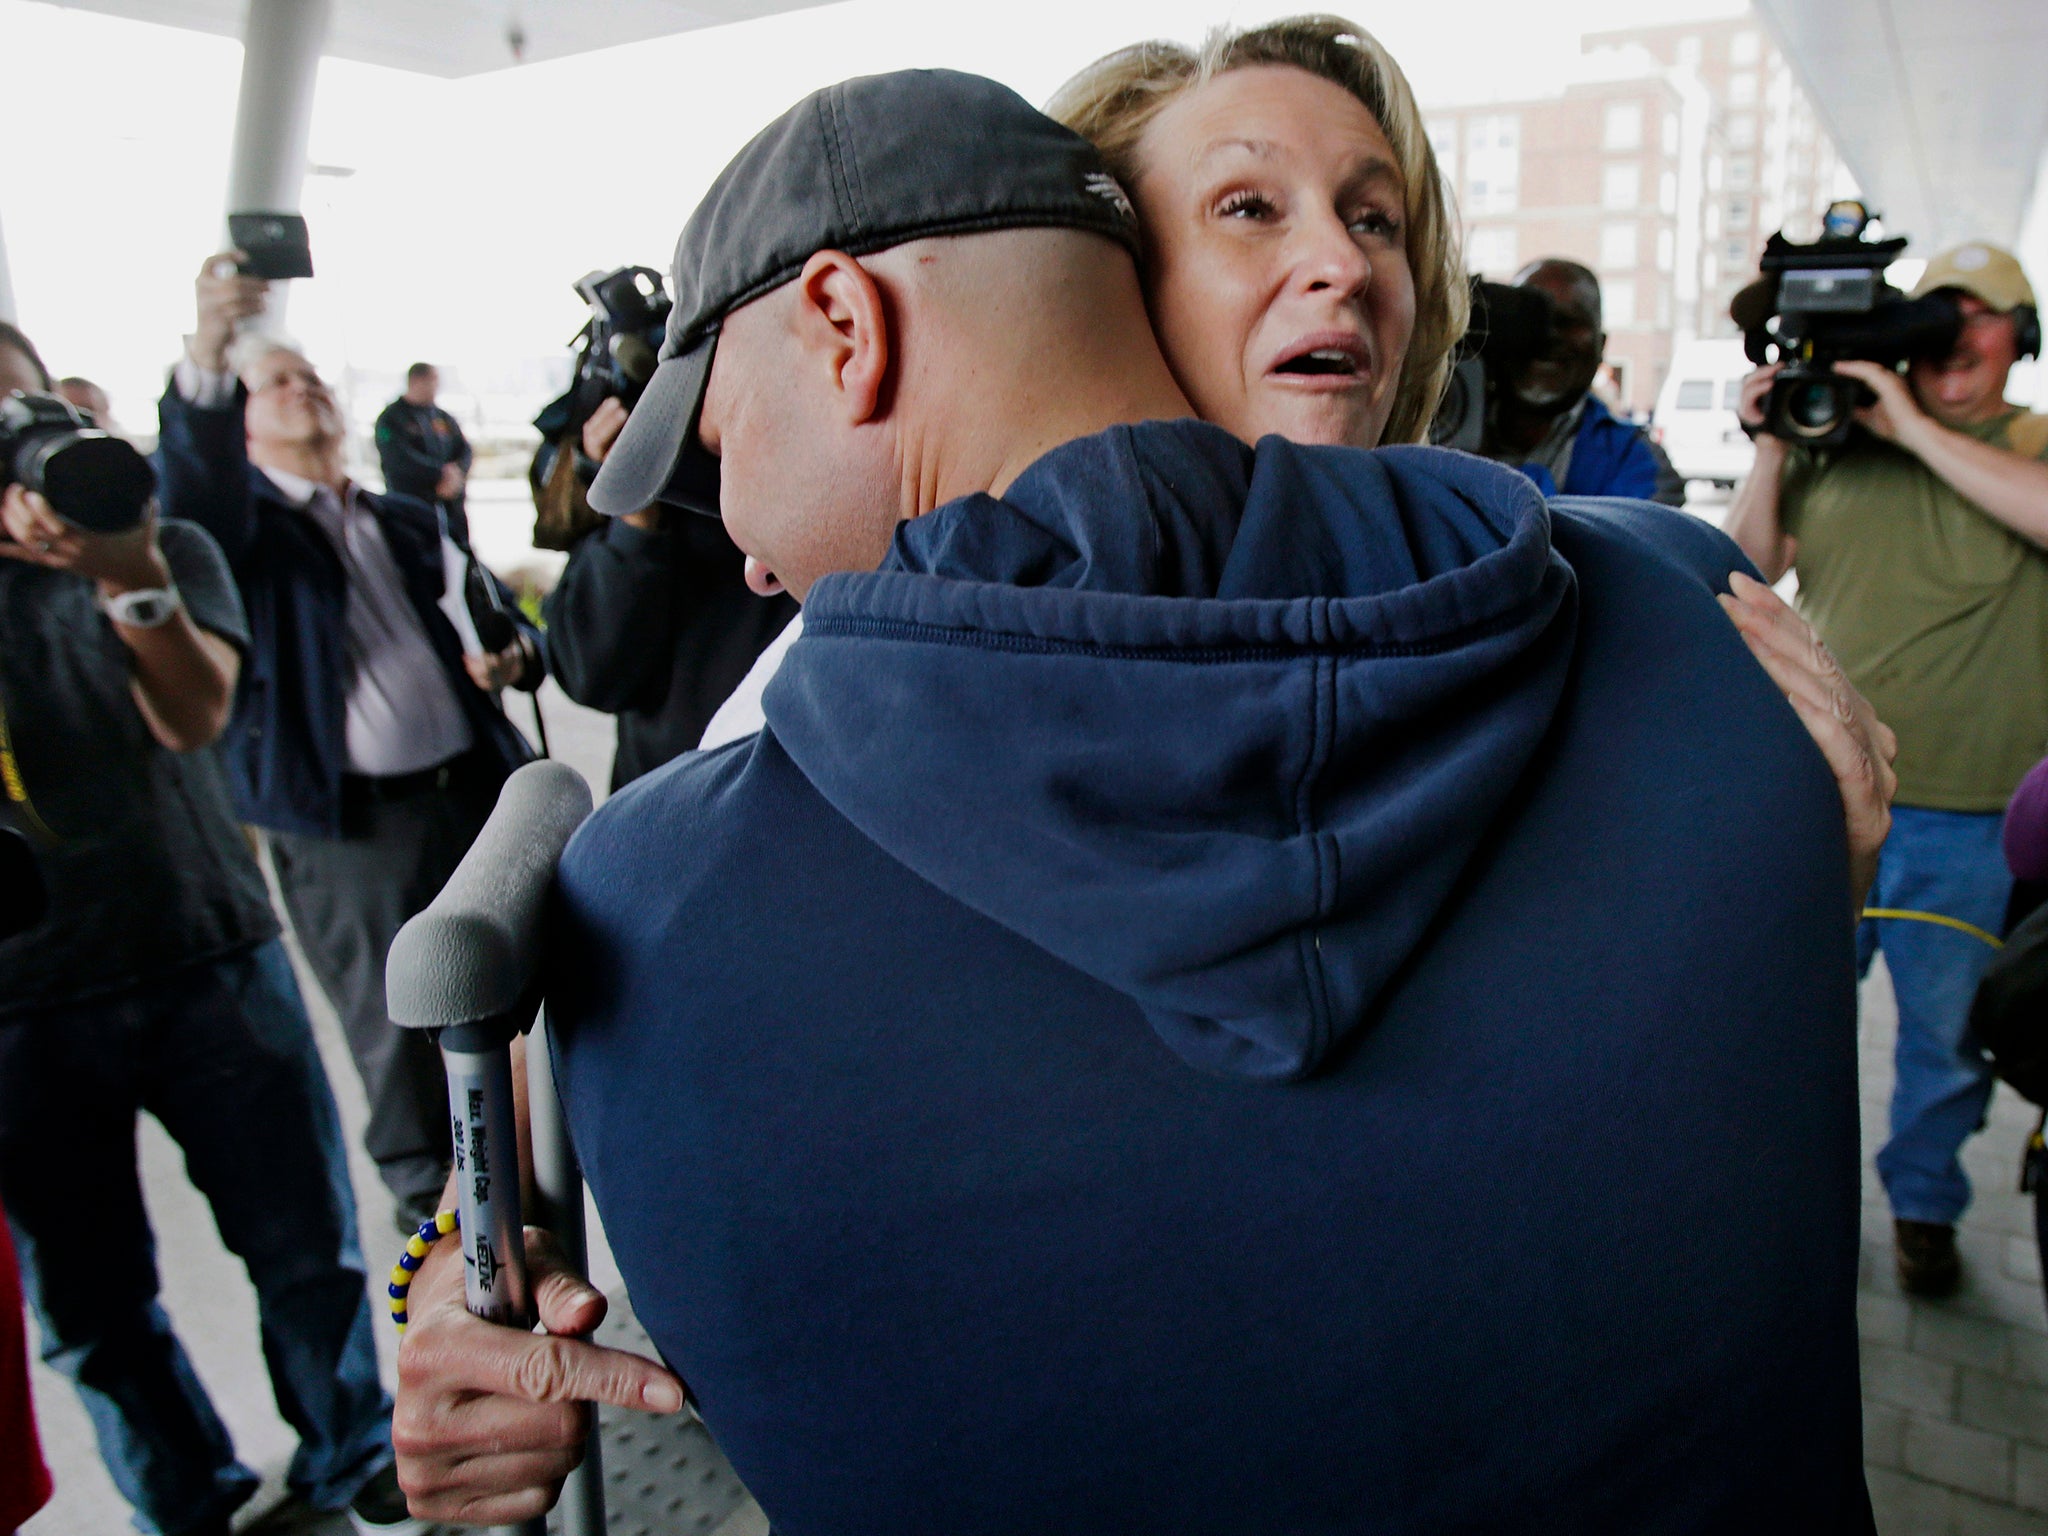 Survivor Roseann Sdoia is hugged and lifted off the ground by her firefighter fiance Mike Meteria as she leaves the Spaulding Rehabilitation Hospital in Boston